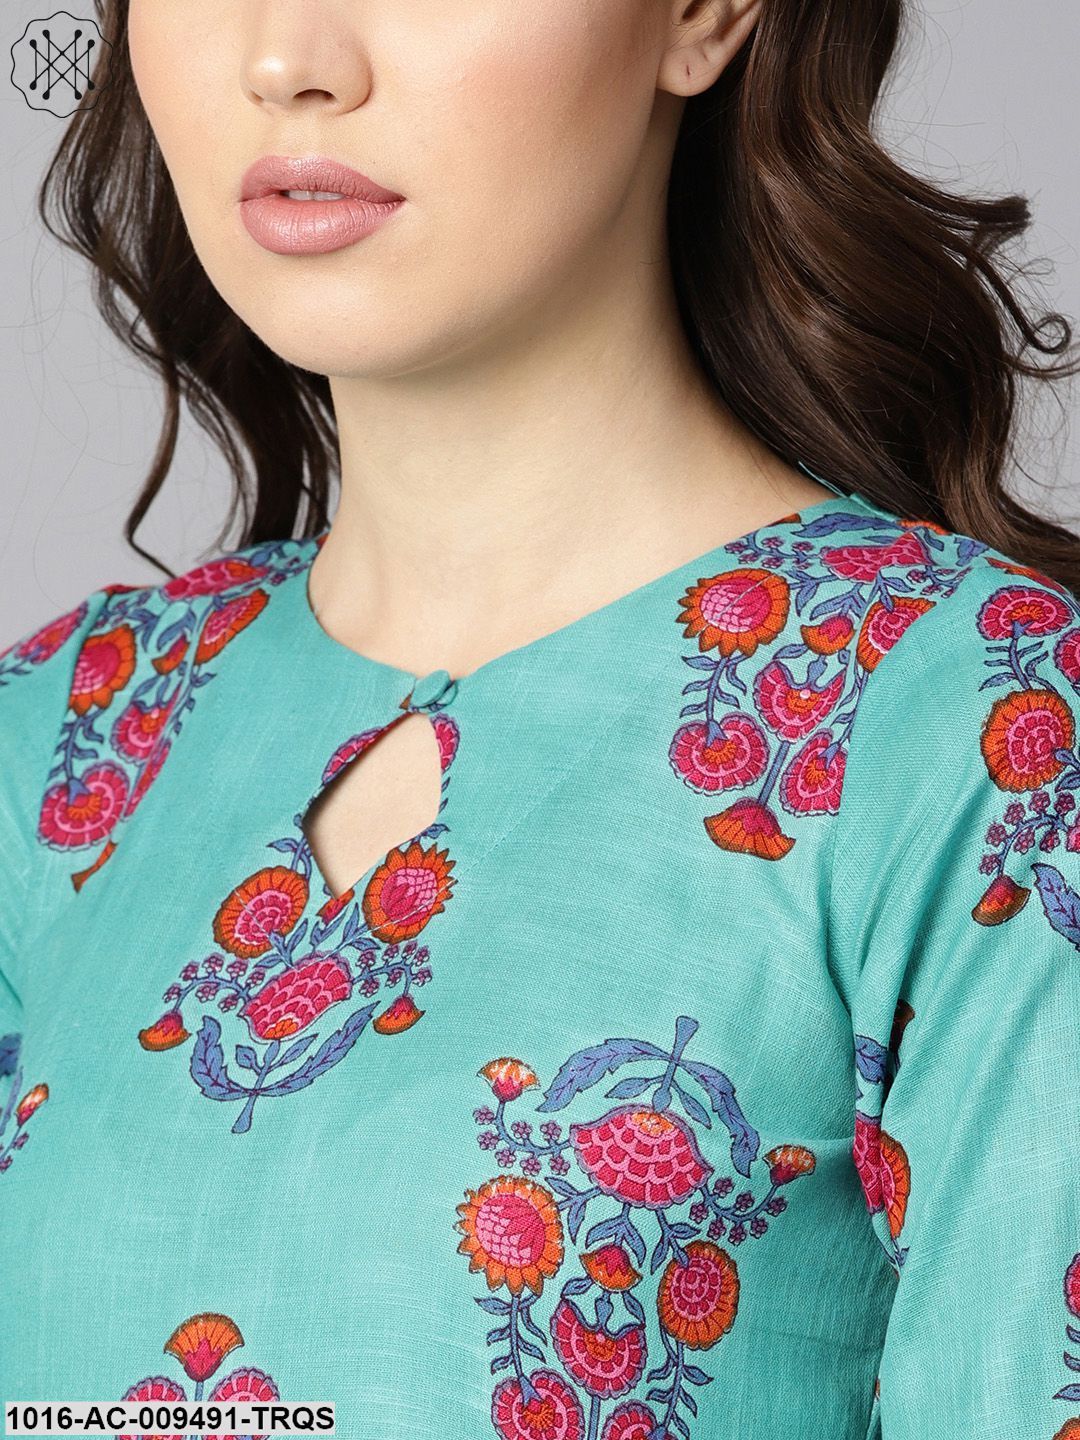 Top 20 Amazing Back Neck Designs For Kurti In 2023